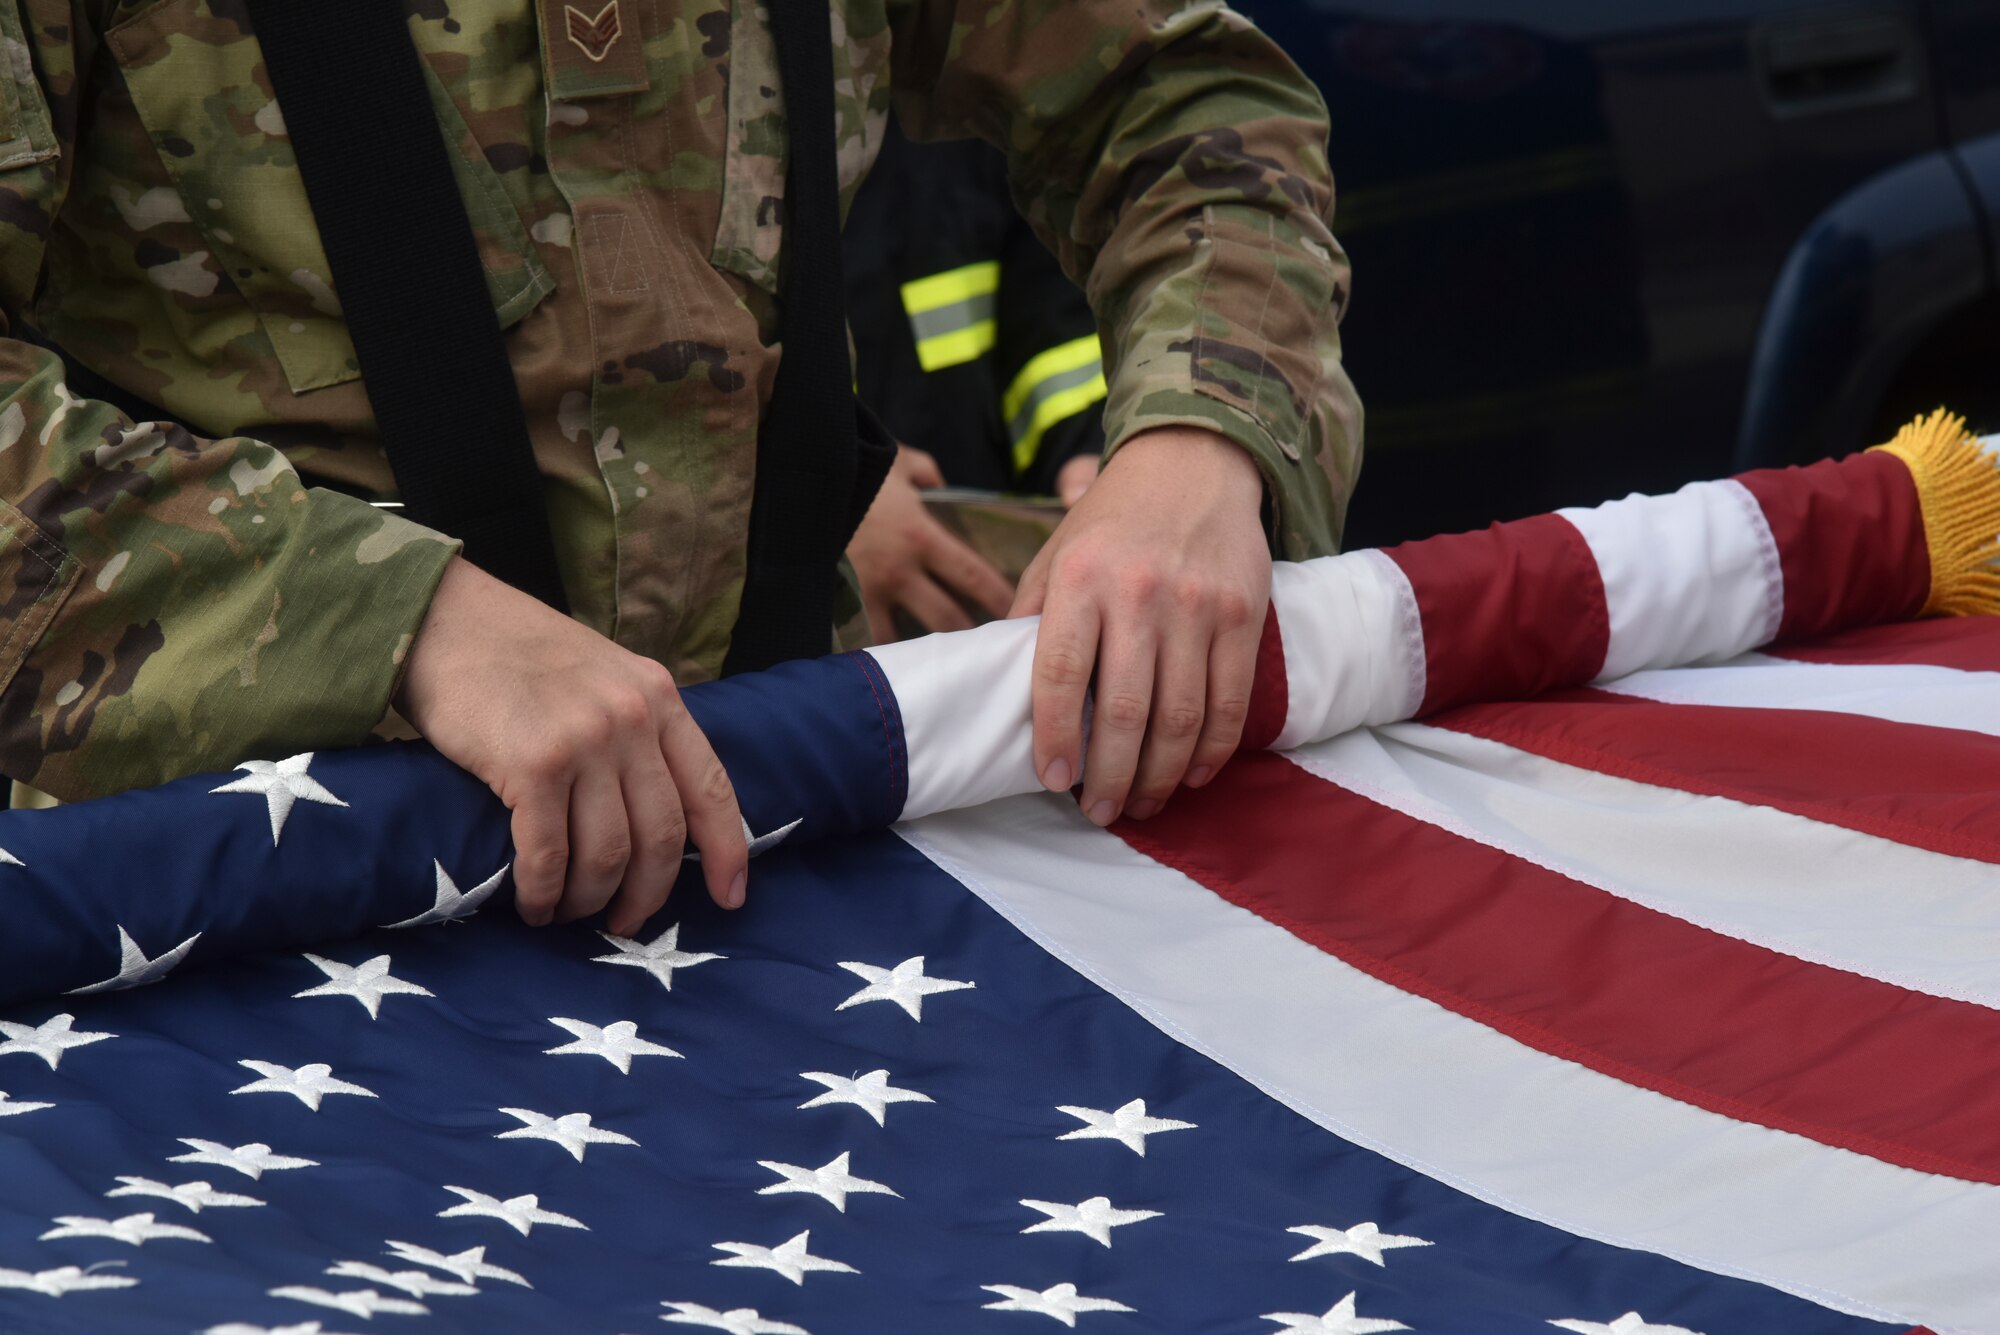 An honor guardsman rolls the American Flag after a 9/11 memorial service on Kunsan Air Base, Republic of Korea.